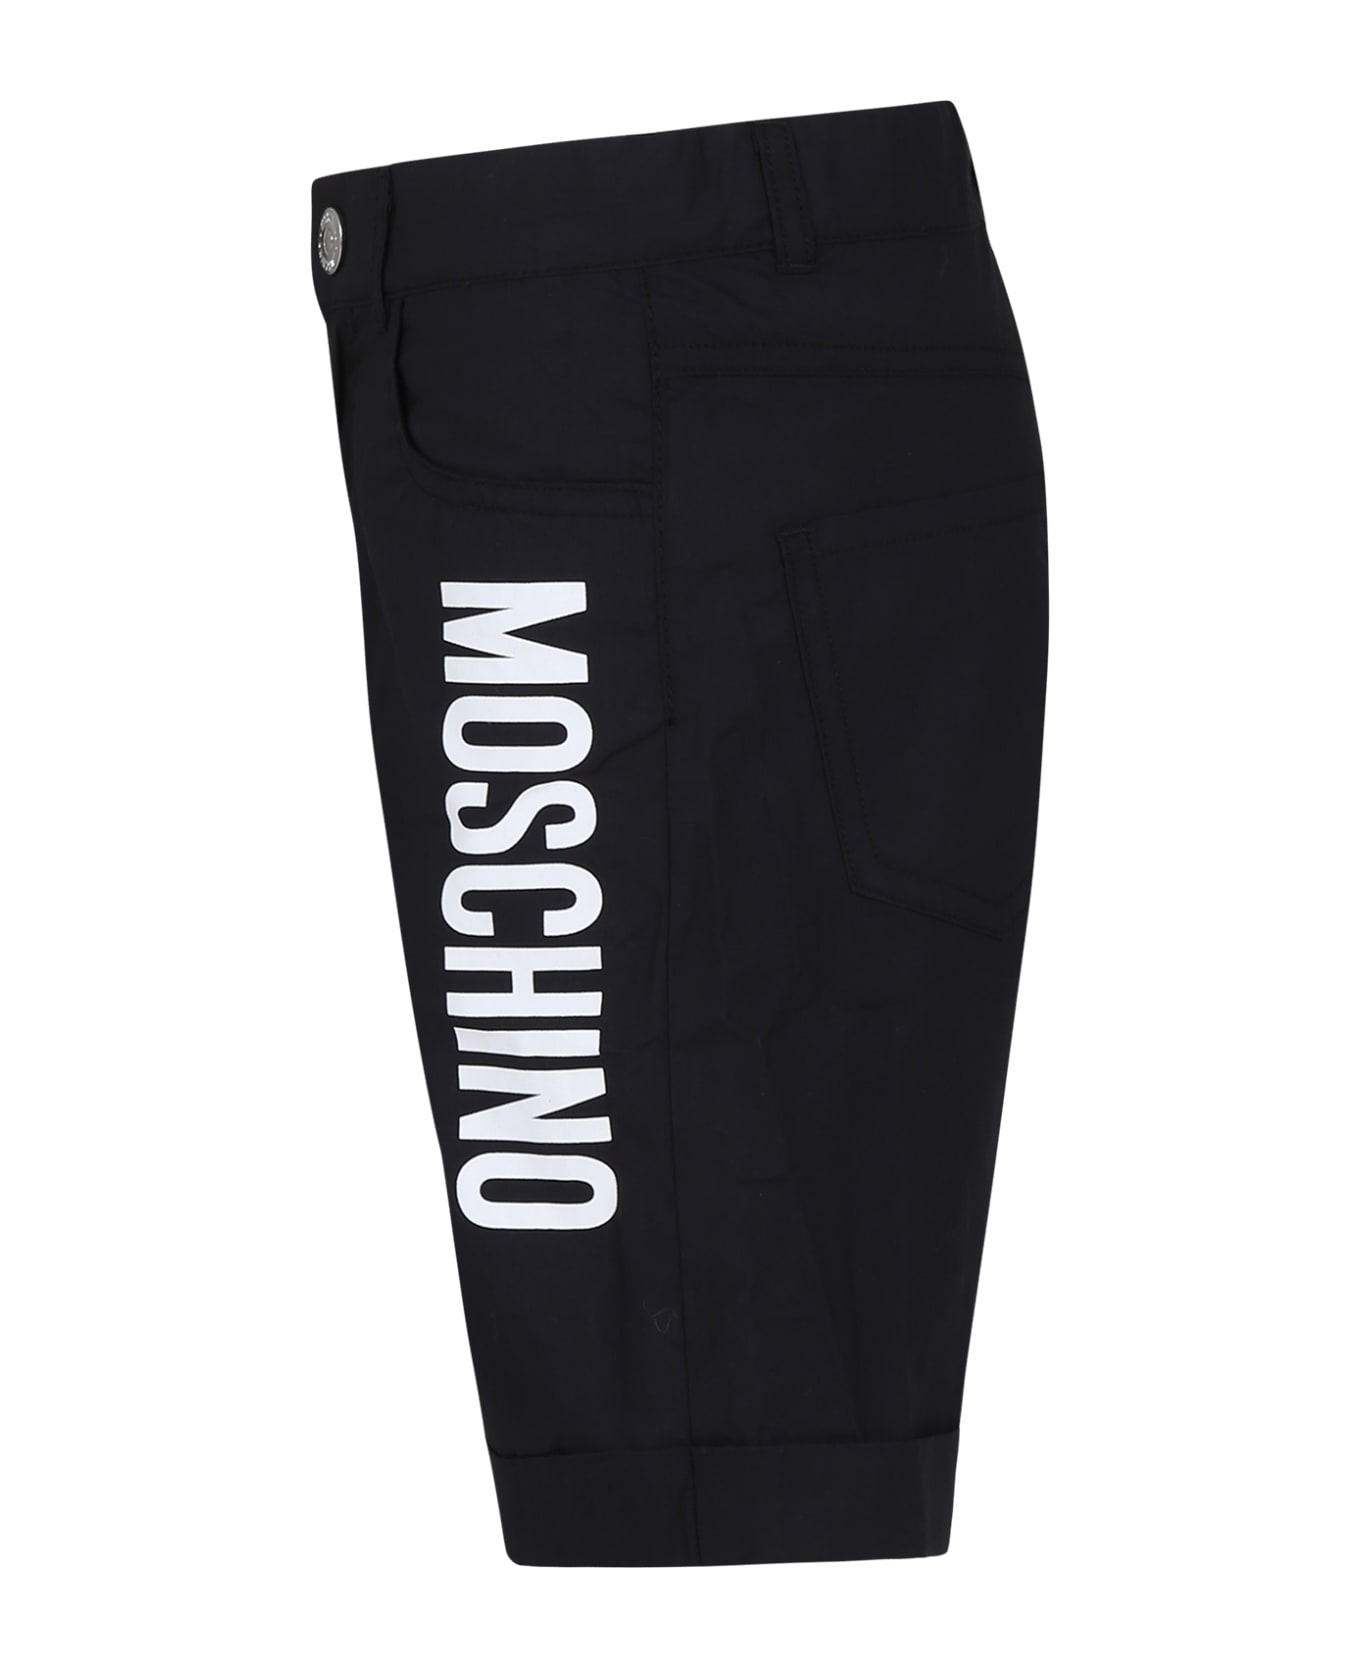 Moschino Black Shorts For Kids With Logo - Black